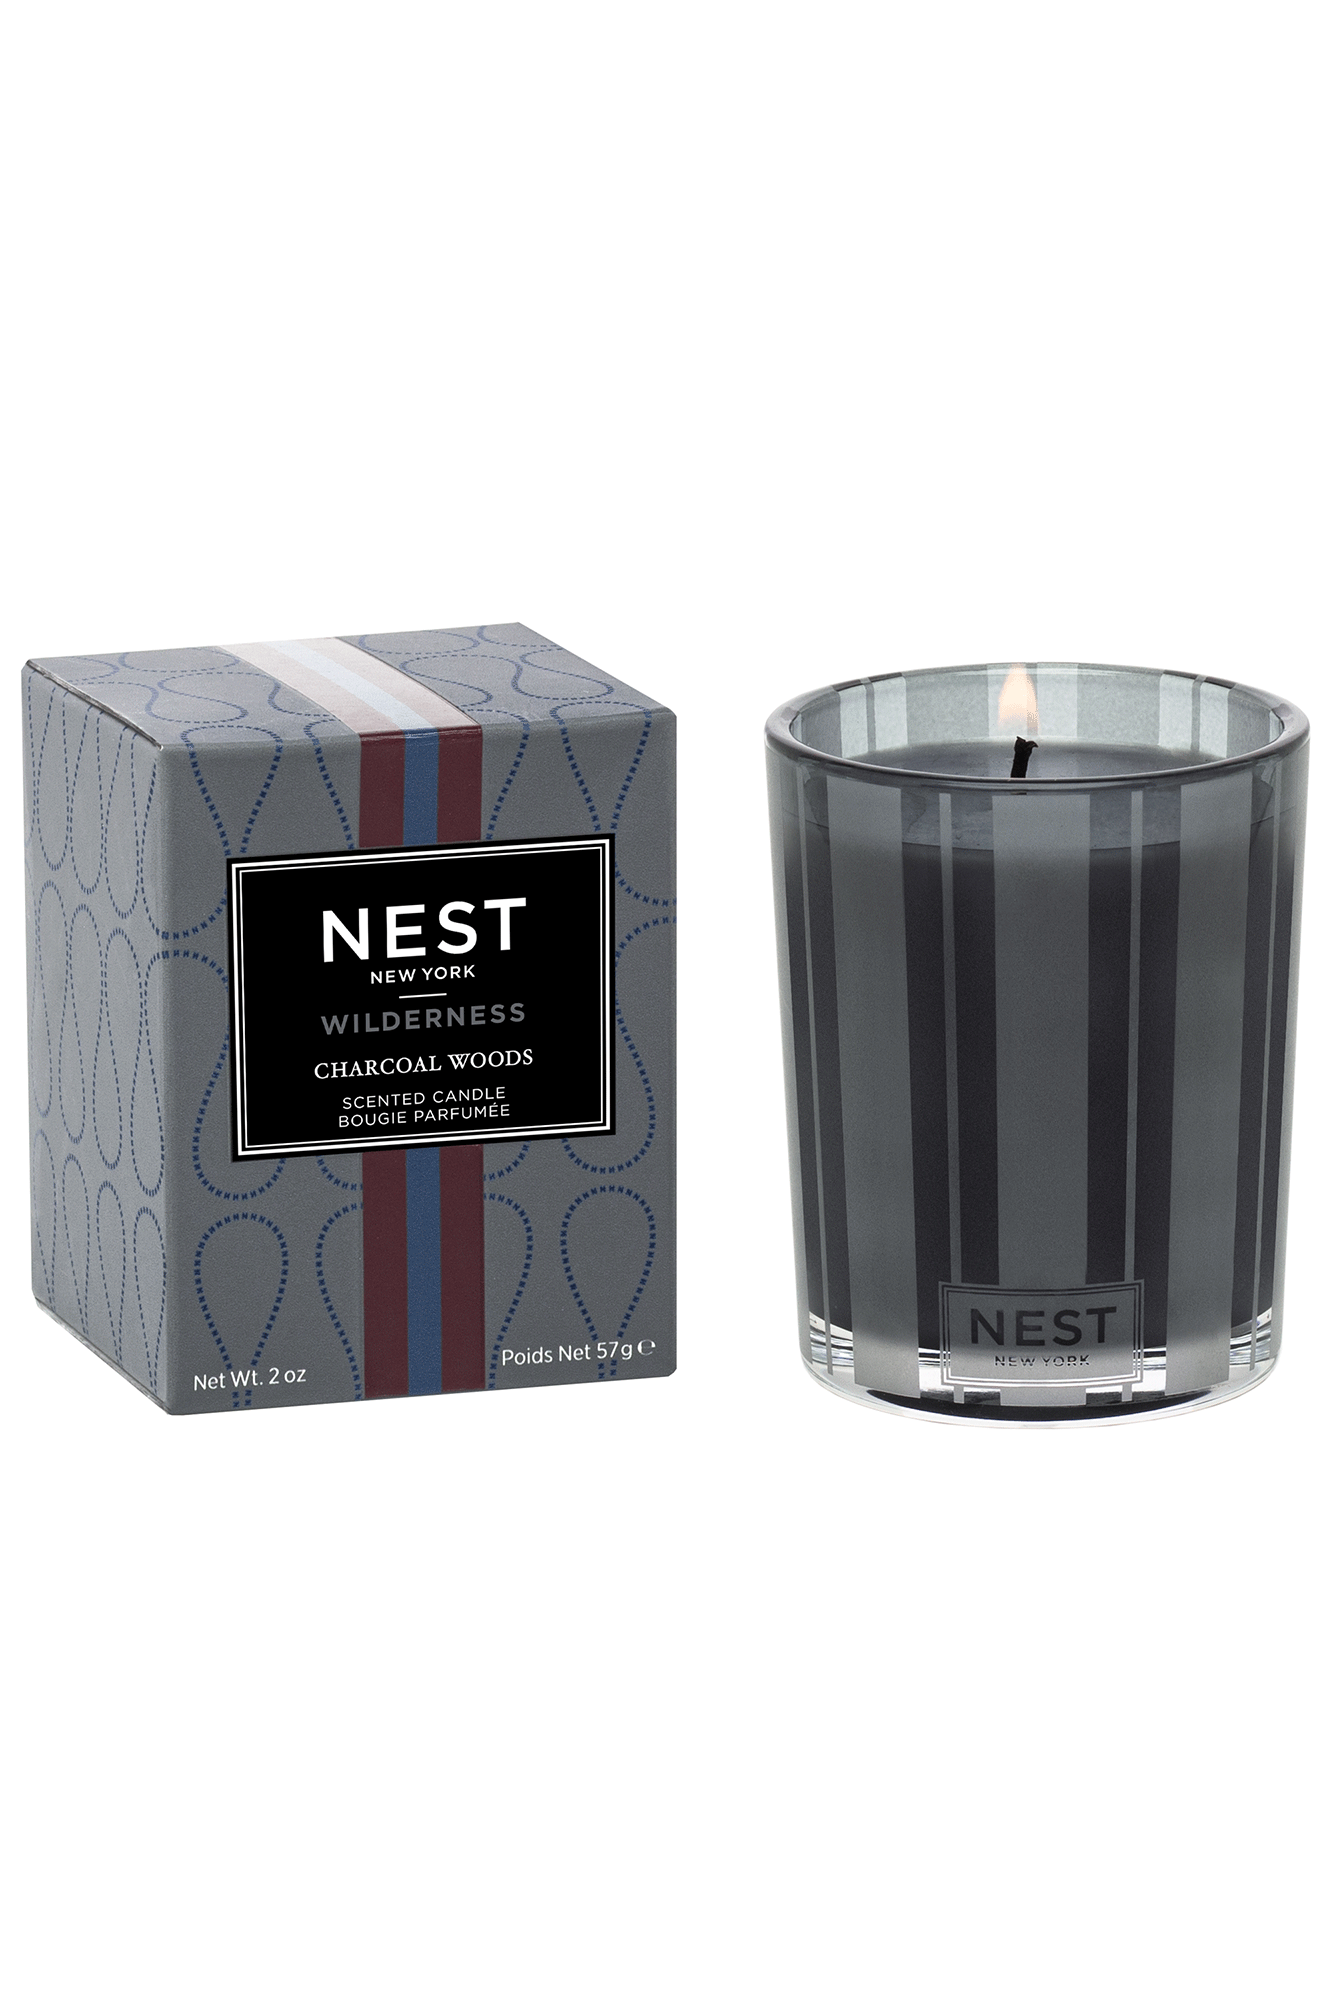 This exquisite candle from Nest is composed of heady notes of smoky labdanum, patchouli, and cedarwood, with a hint of black truffle and charred birchwood. Charcoal Woods Votive Candle adds a mysterious and inviting ambience to any home.